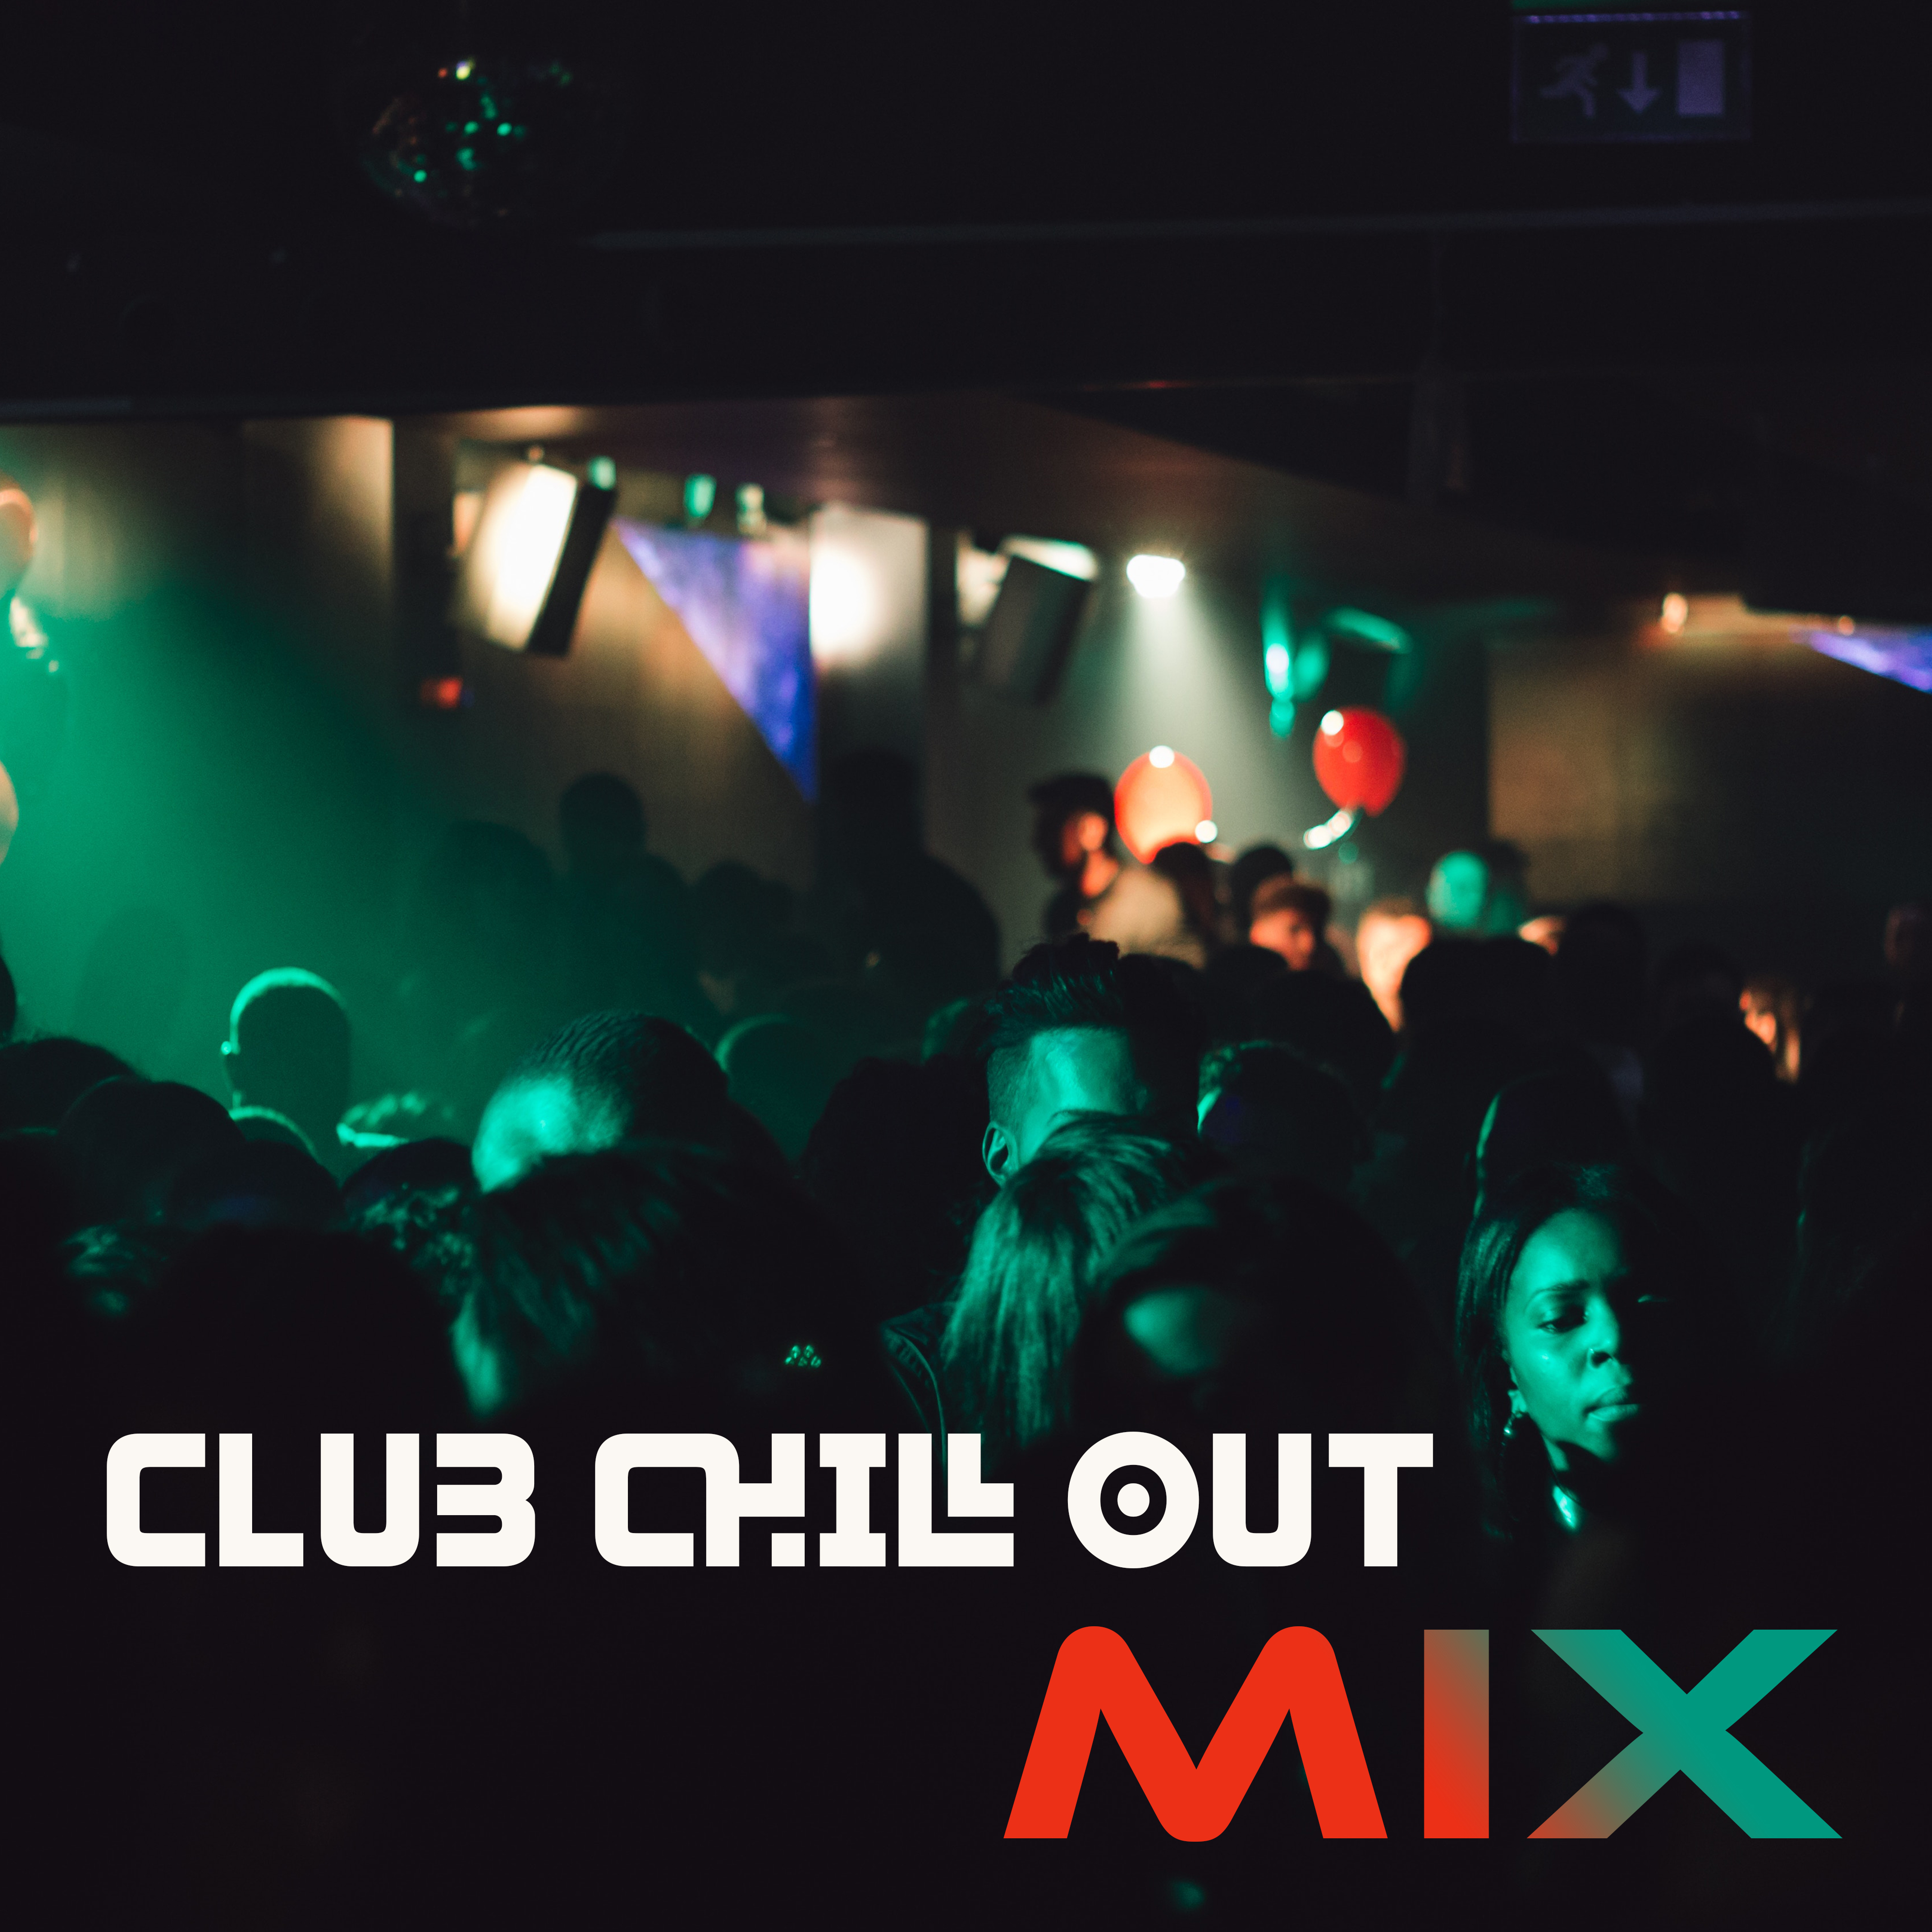 Club Chill Out Mix